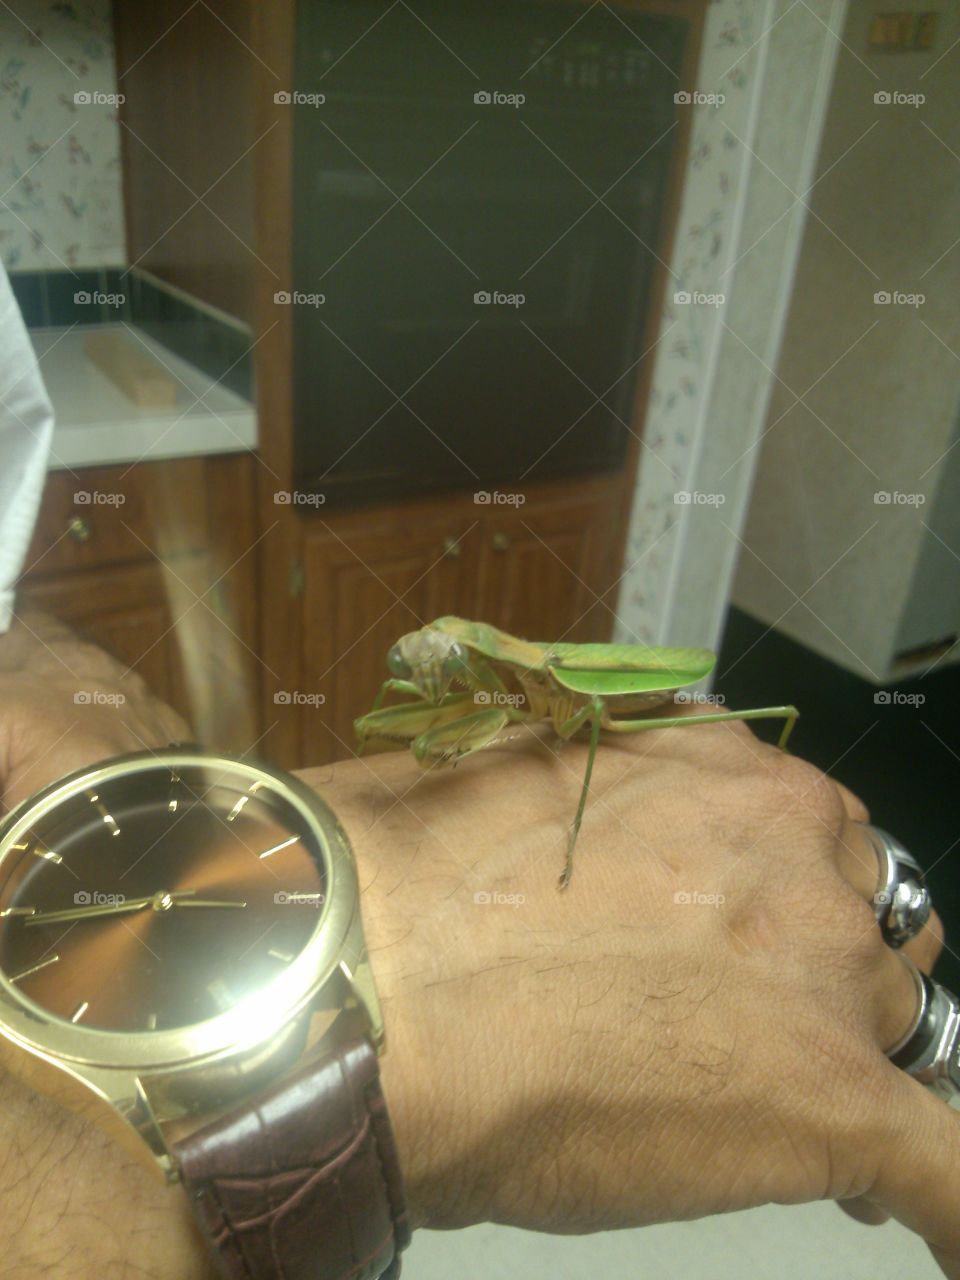 mantis on brother